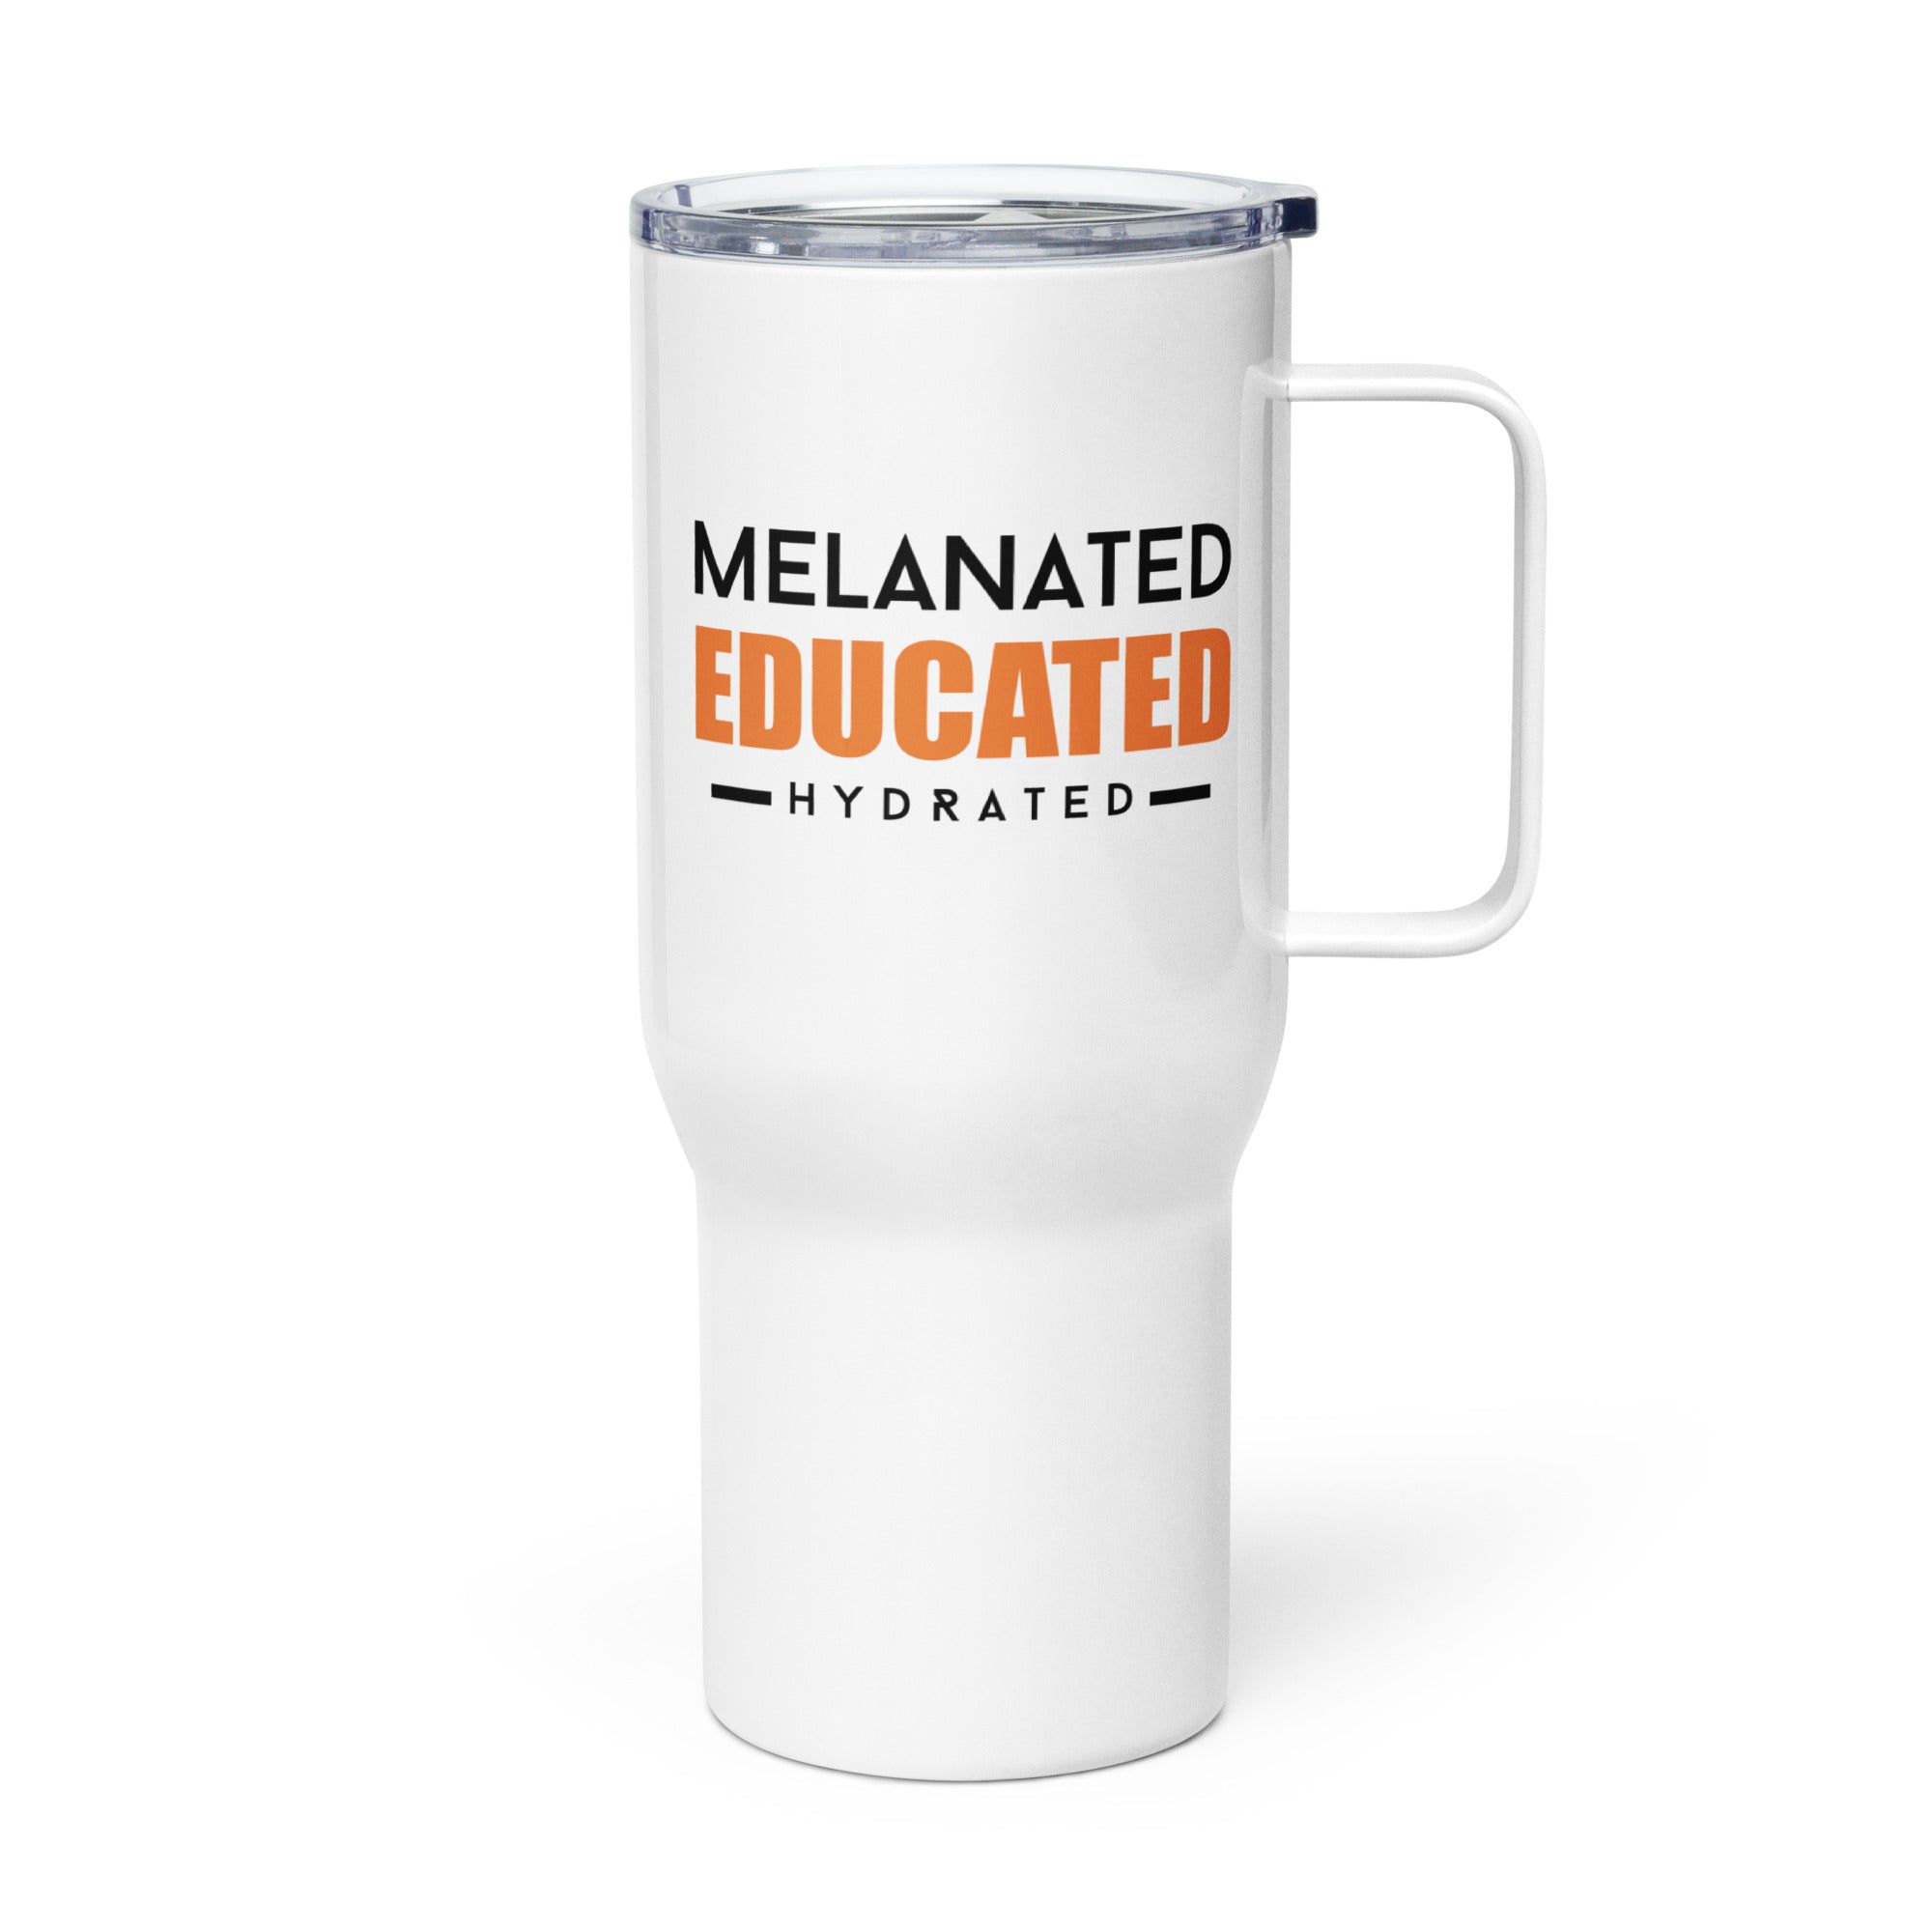 Melanated Educated Hydrated Travel mug with a handle